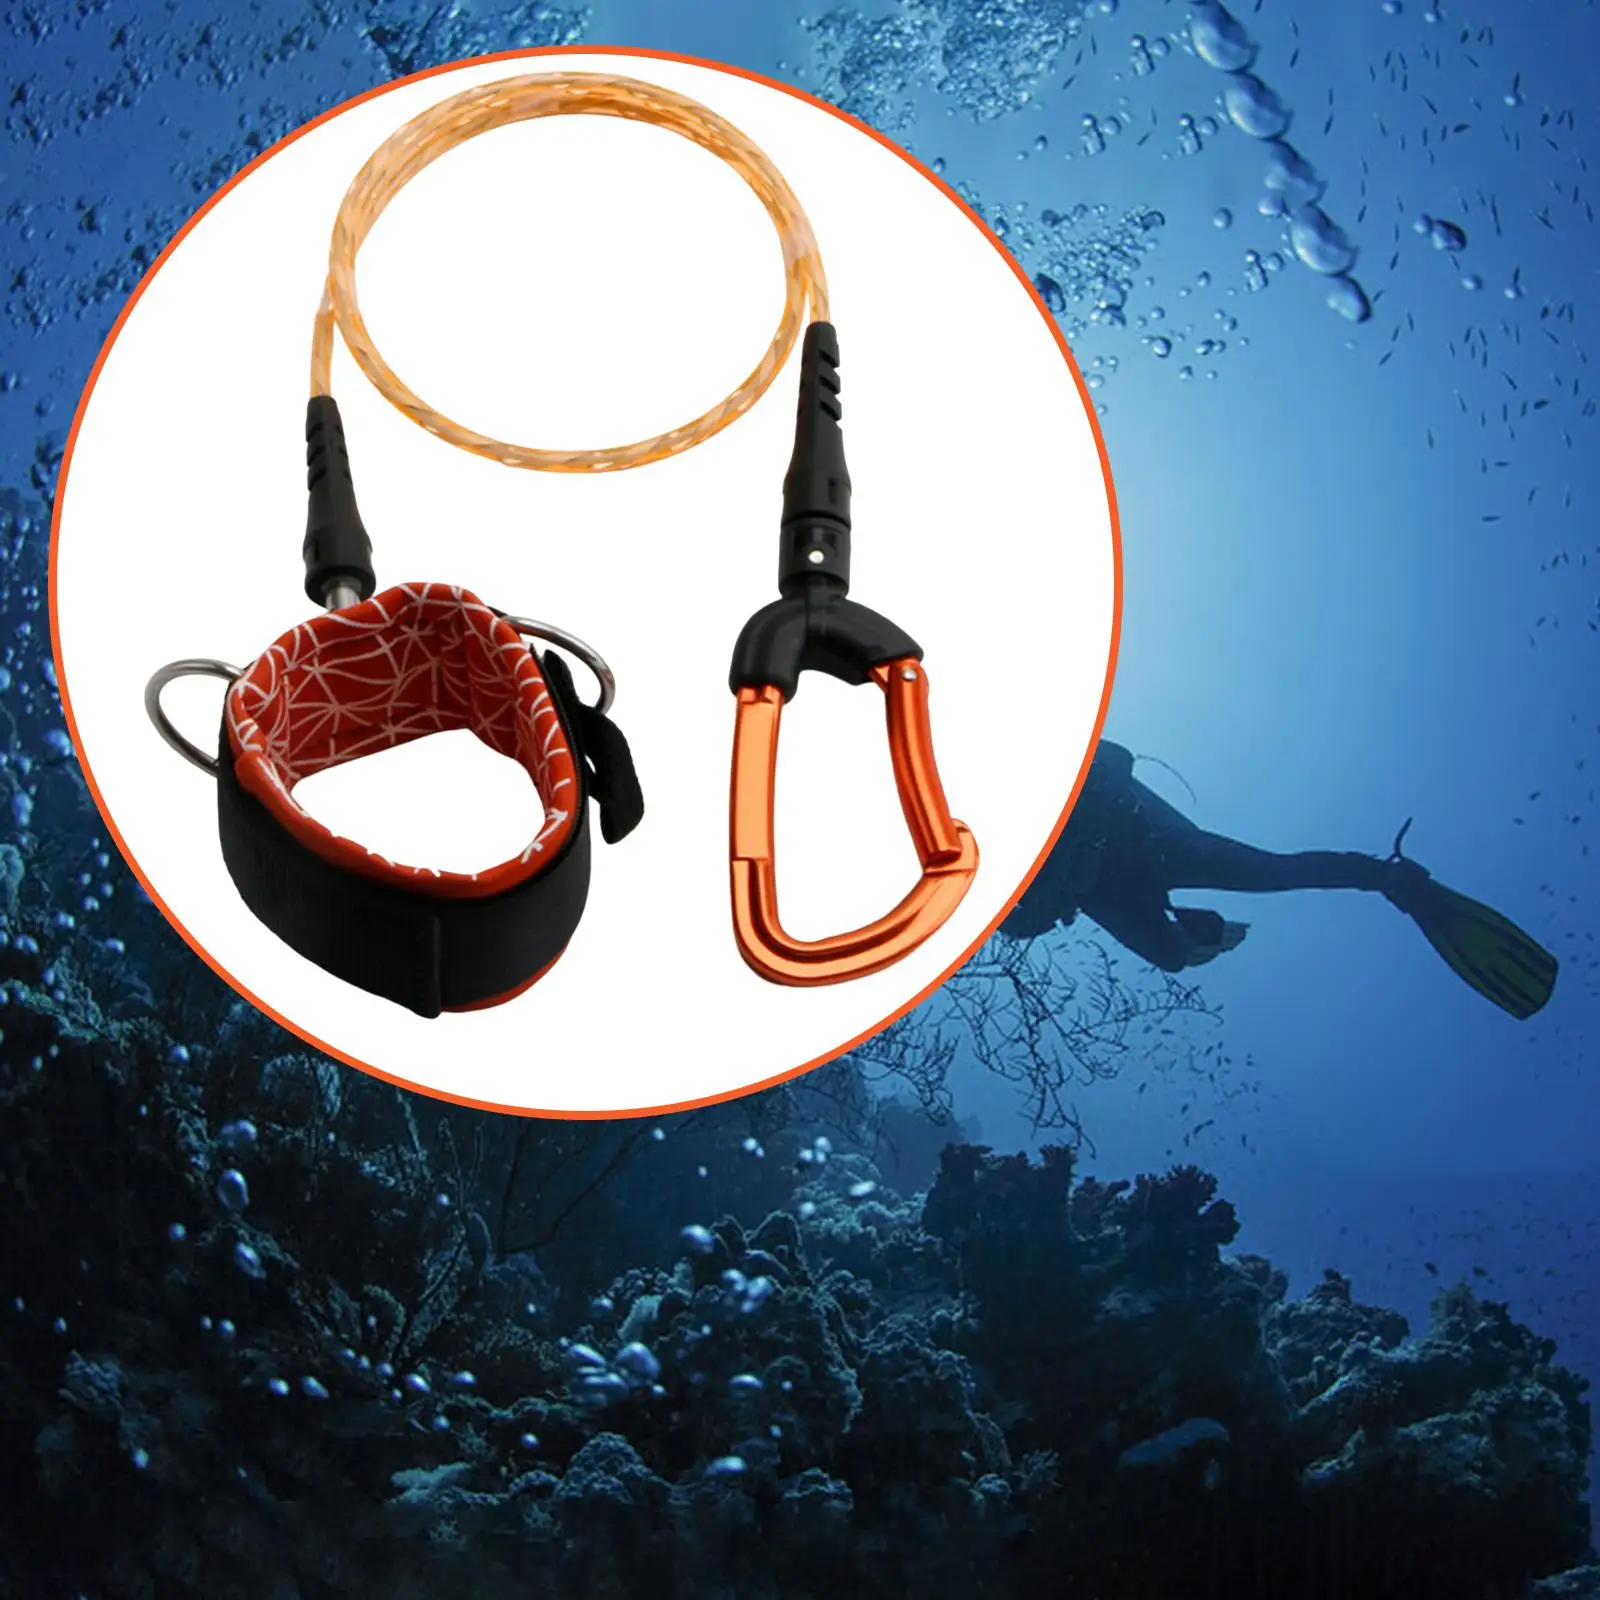 Freediving Lanyard Durable Anti Lost Safety Cable Scuba Diving Rope for Snorkeling Freediving Underwater Sports Gear Accessories